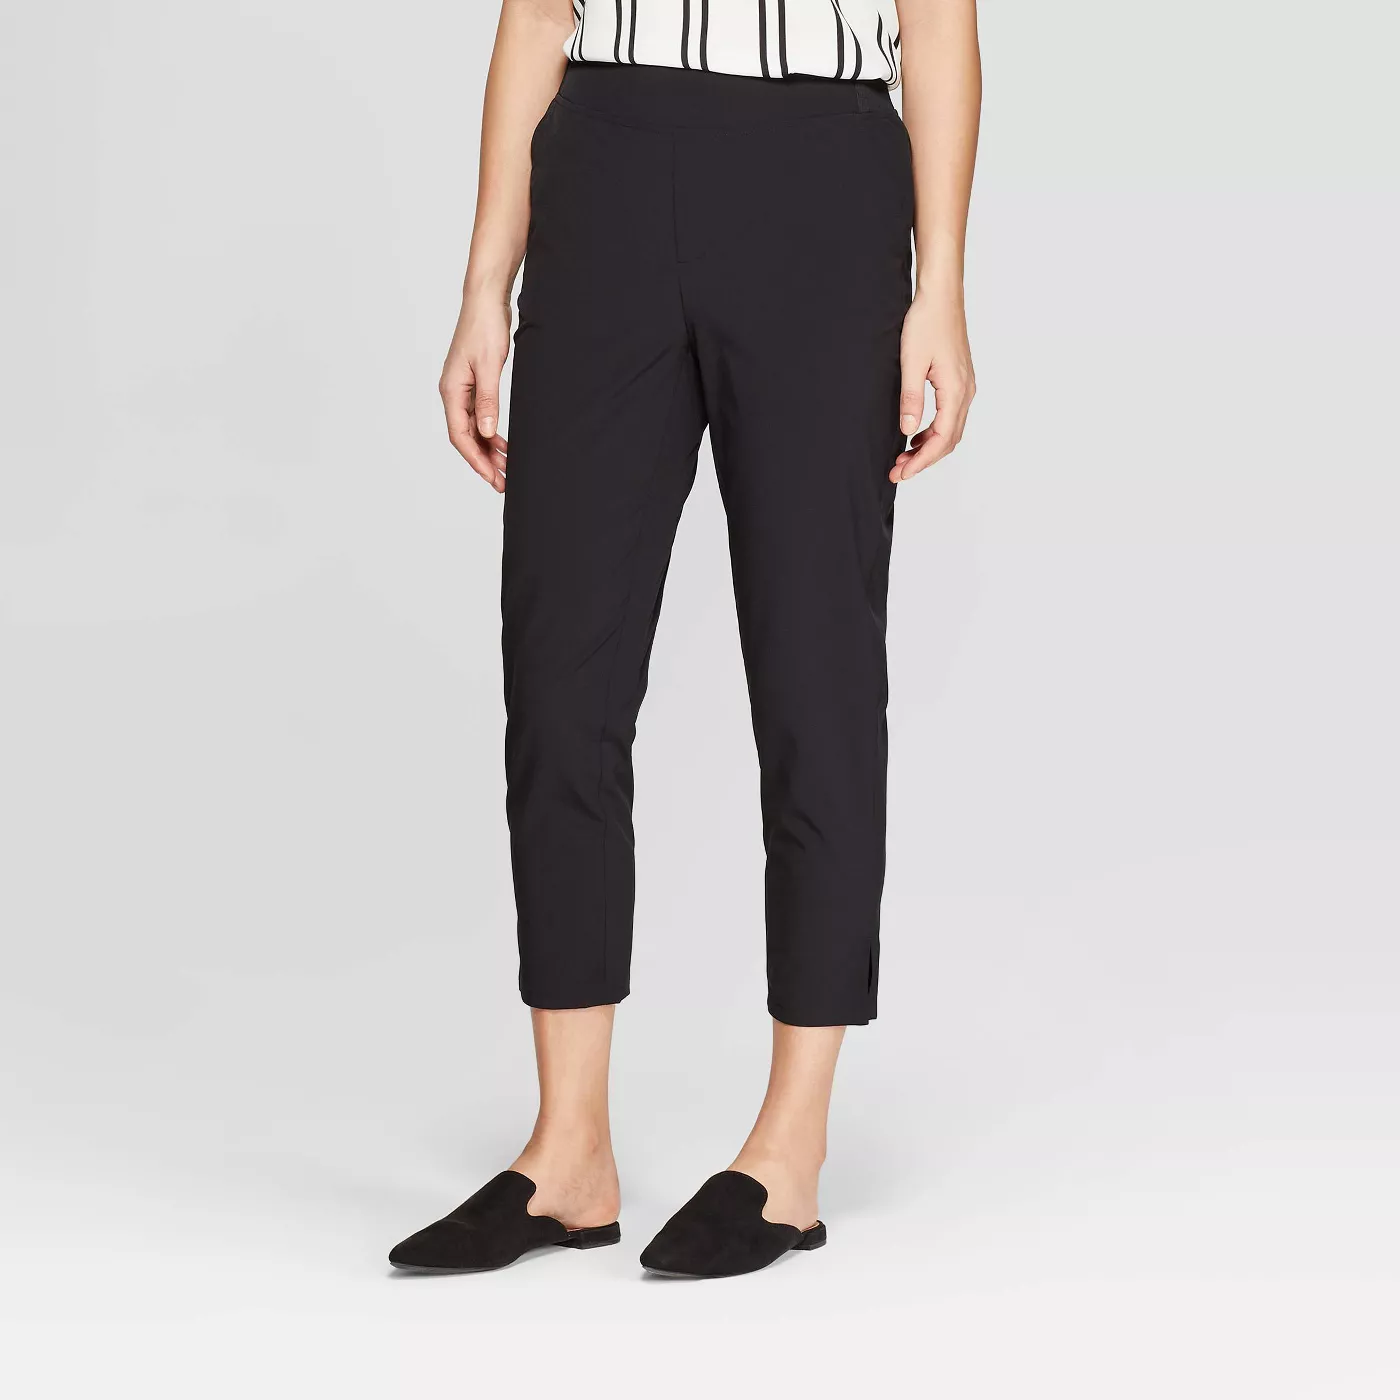 Women's Mid-Rise Slim Woven Straight Pants - A New Day™ - image 1 of 3